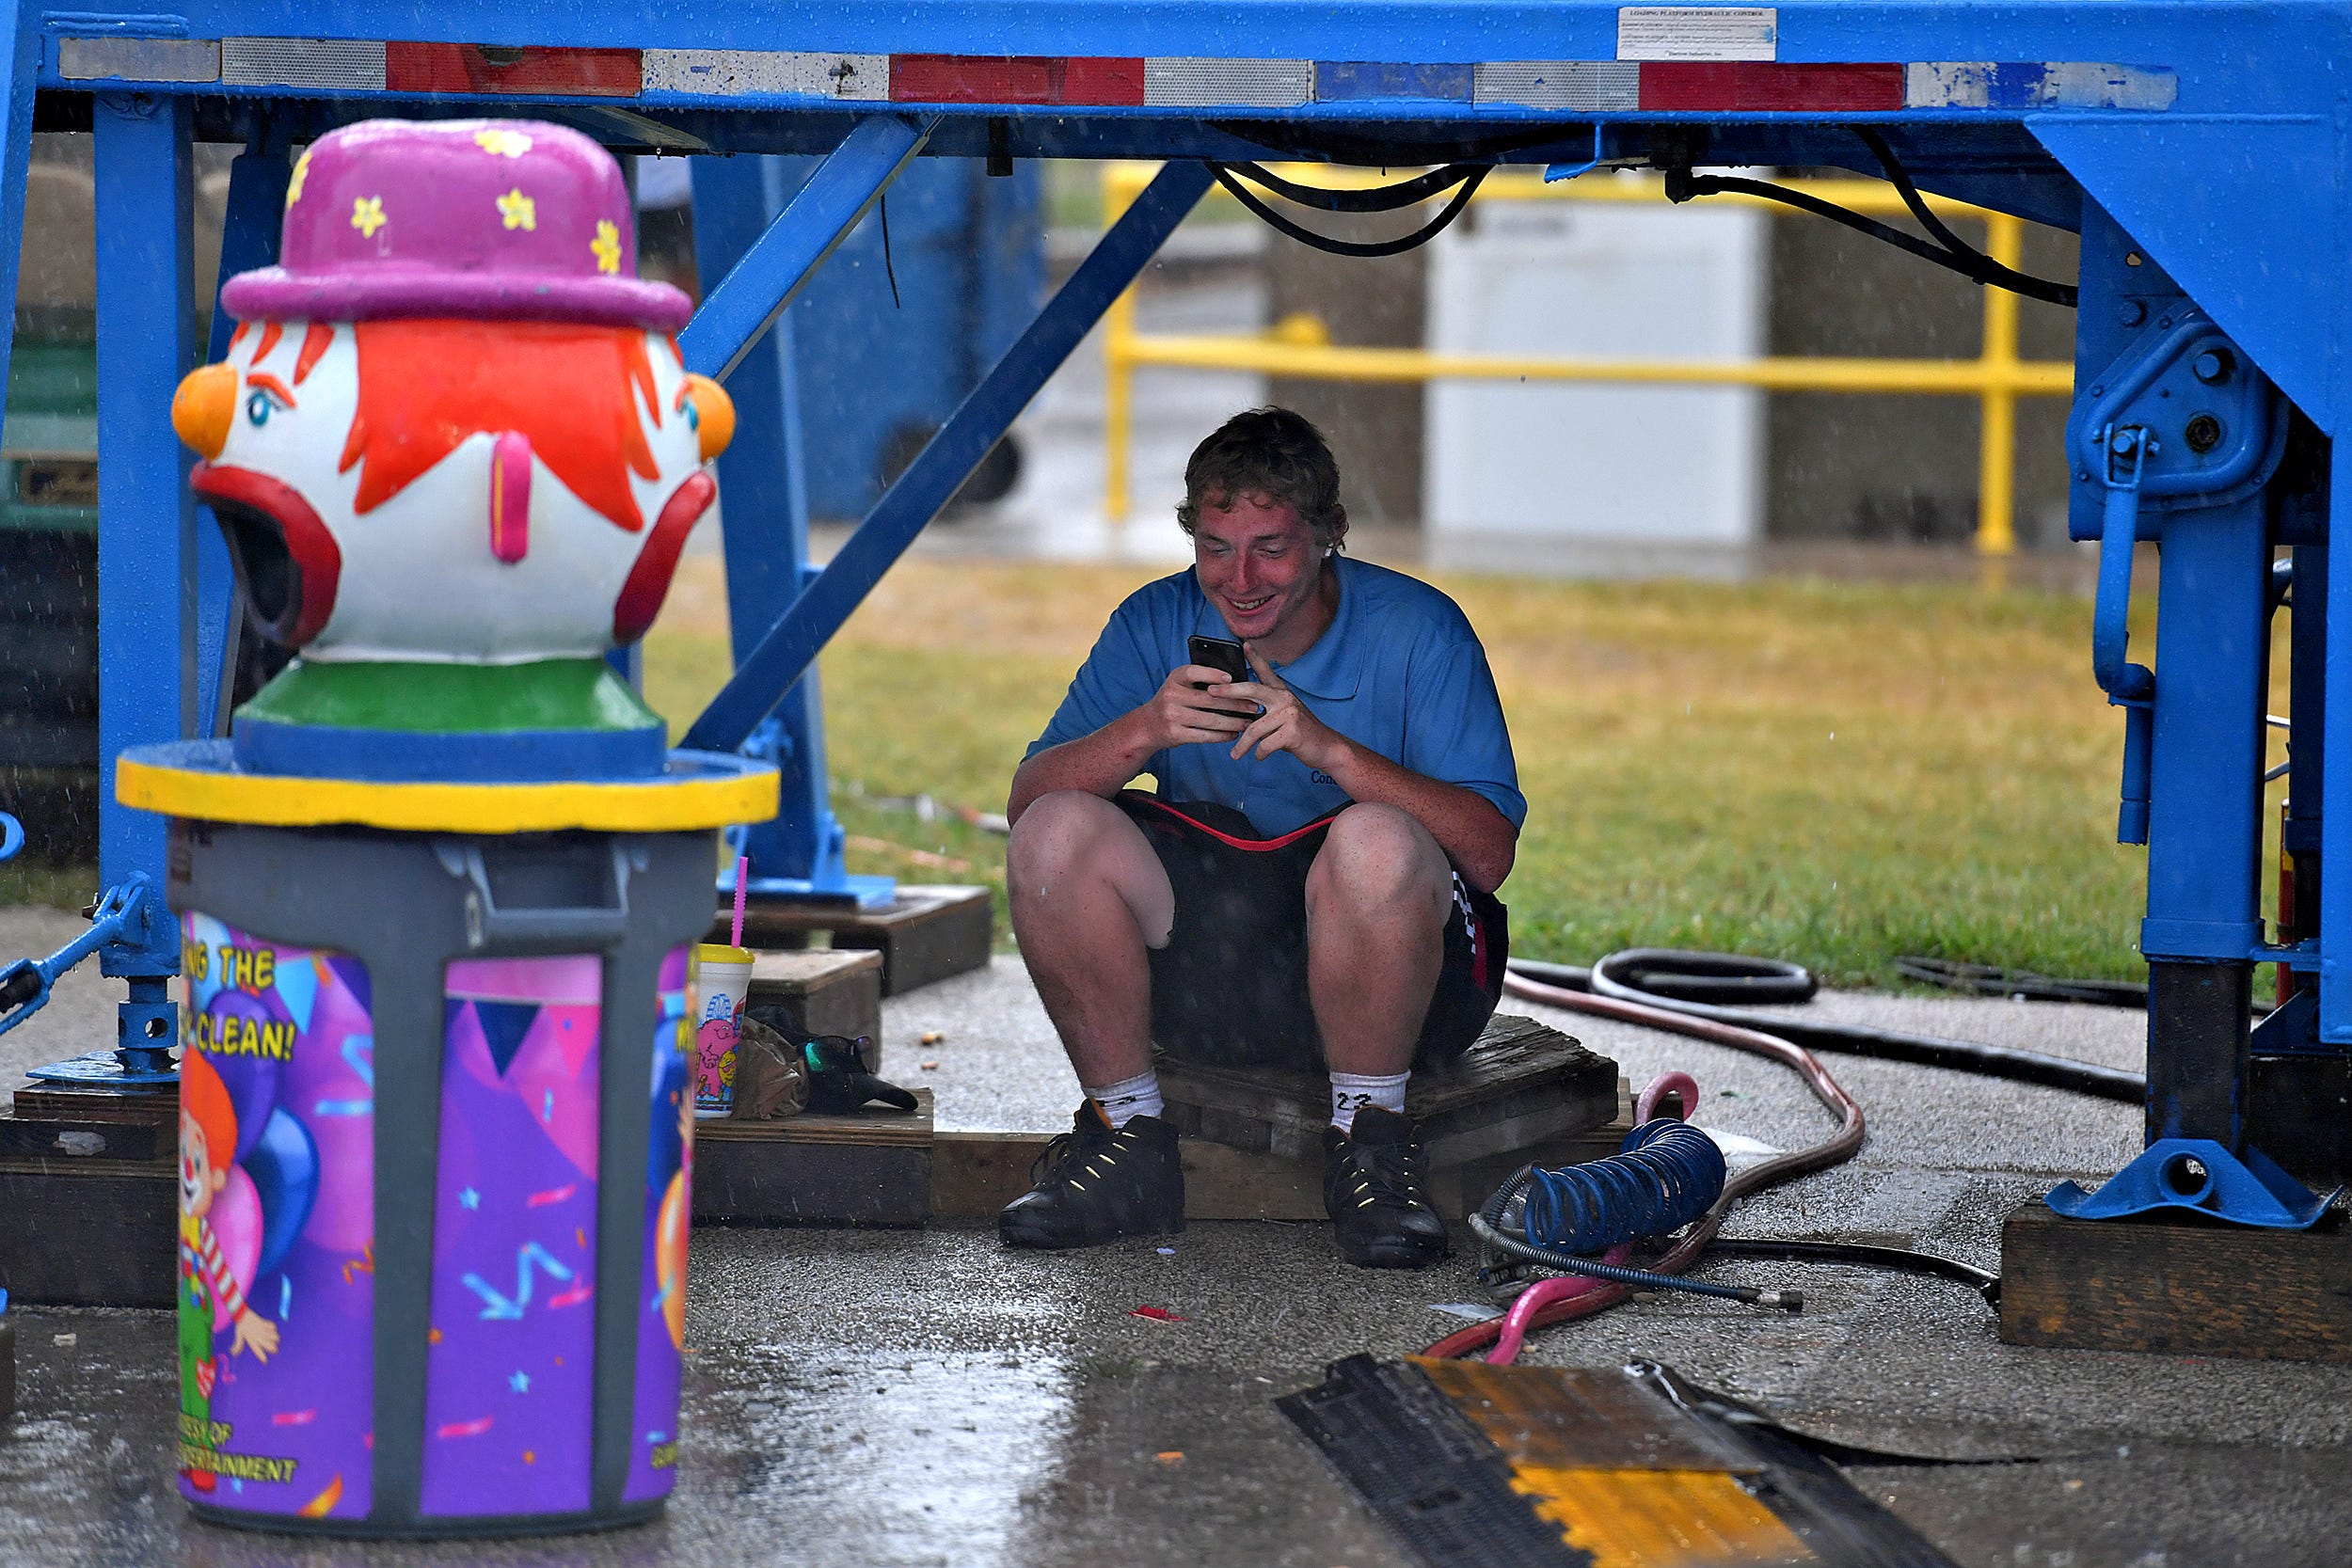 The final day of York State Fair in York, Pa., Sunday, July 31, 2022. Dawn J. Sagert/The York Dispatch